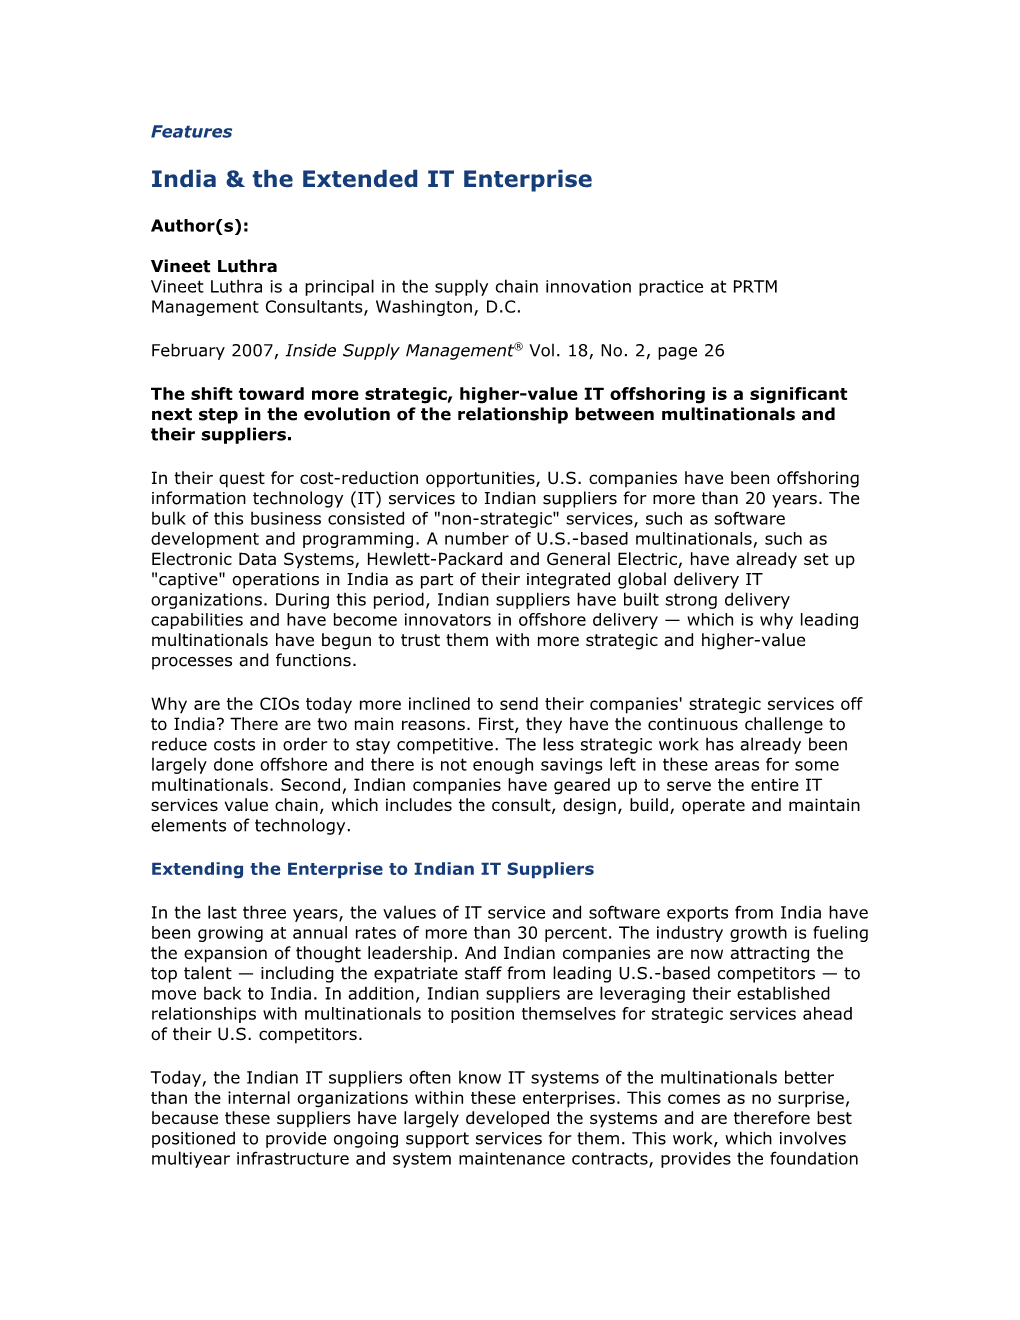 India & the Extended IT Enterprise